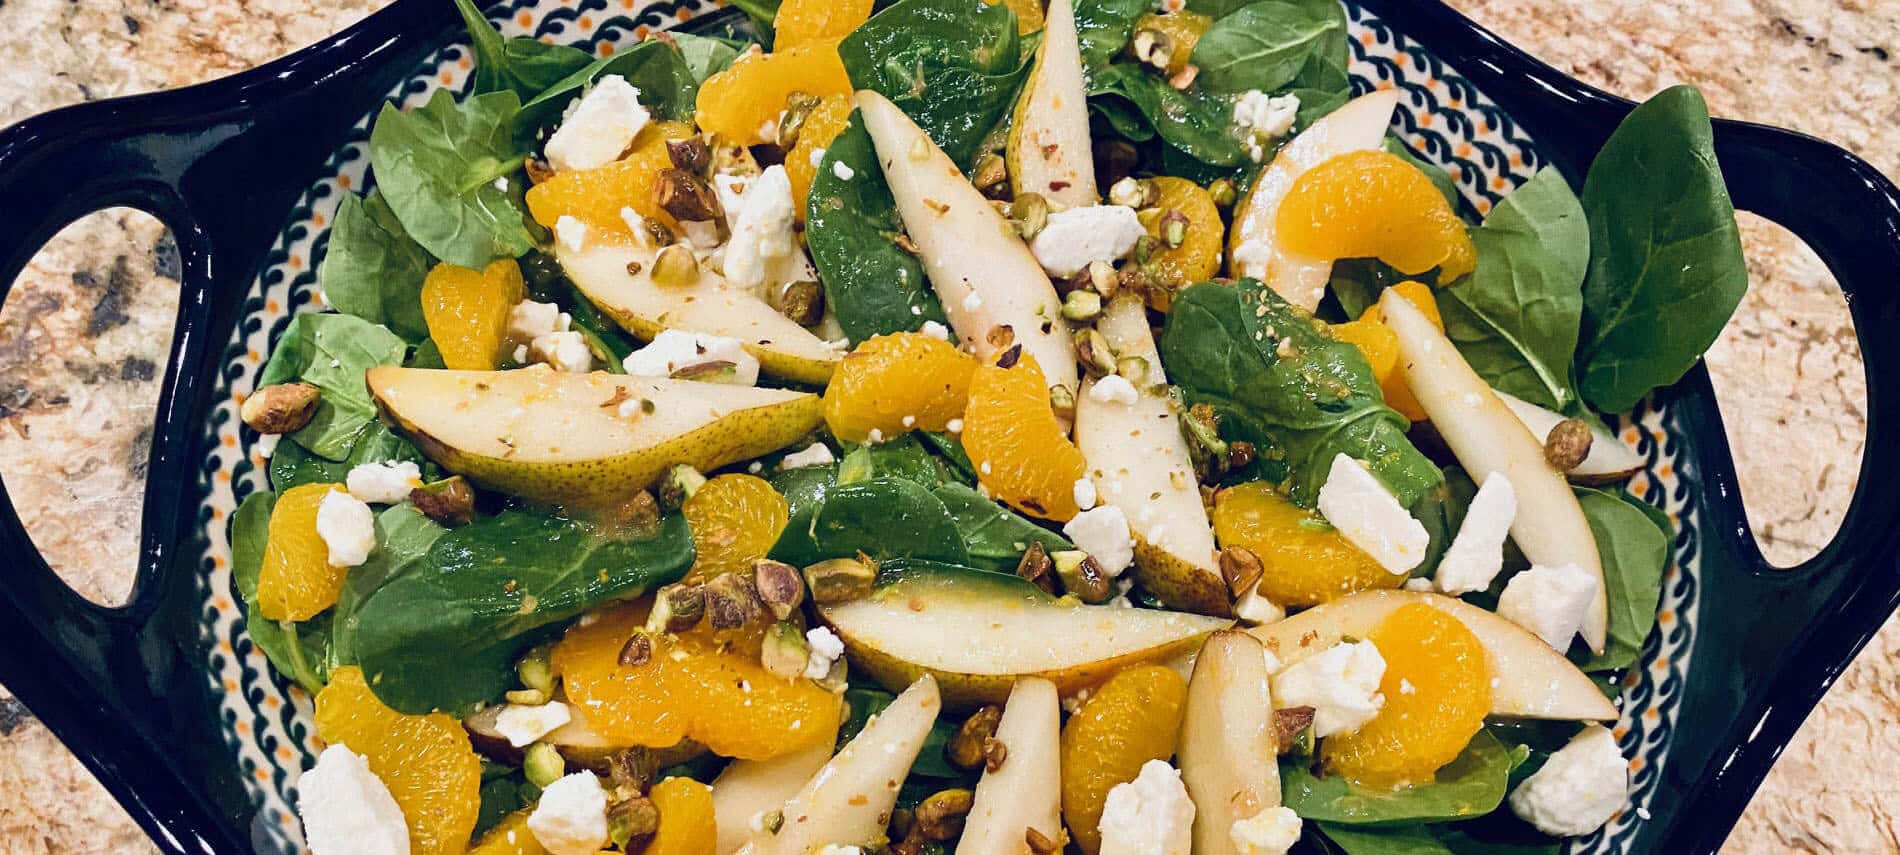 Irish Flag Salad with spinach, pear slices, mandarin oranges, feta cheese and pistachios